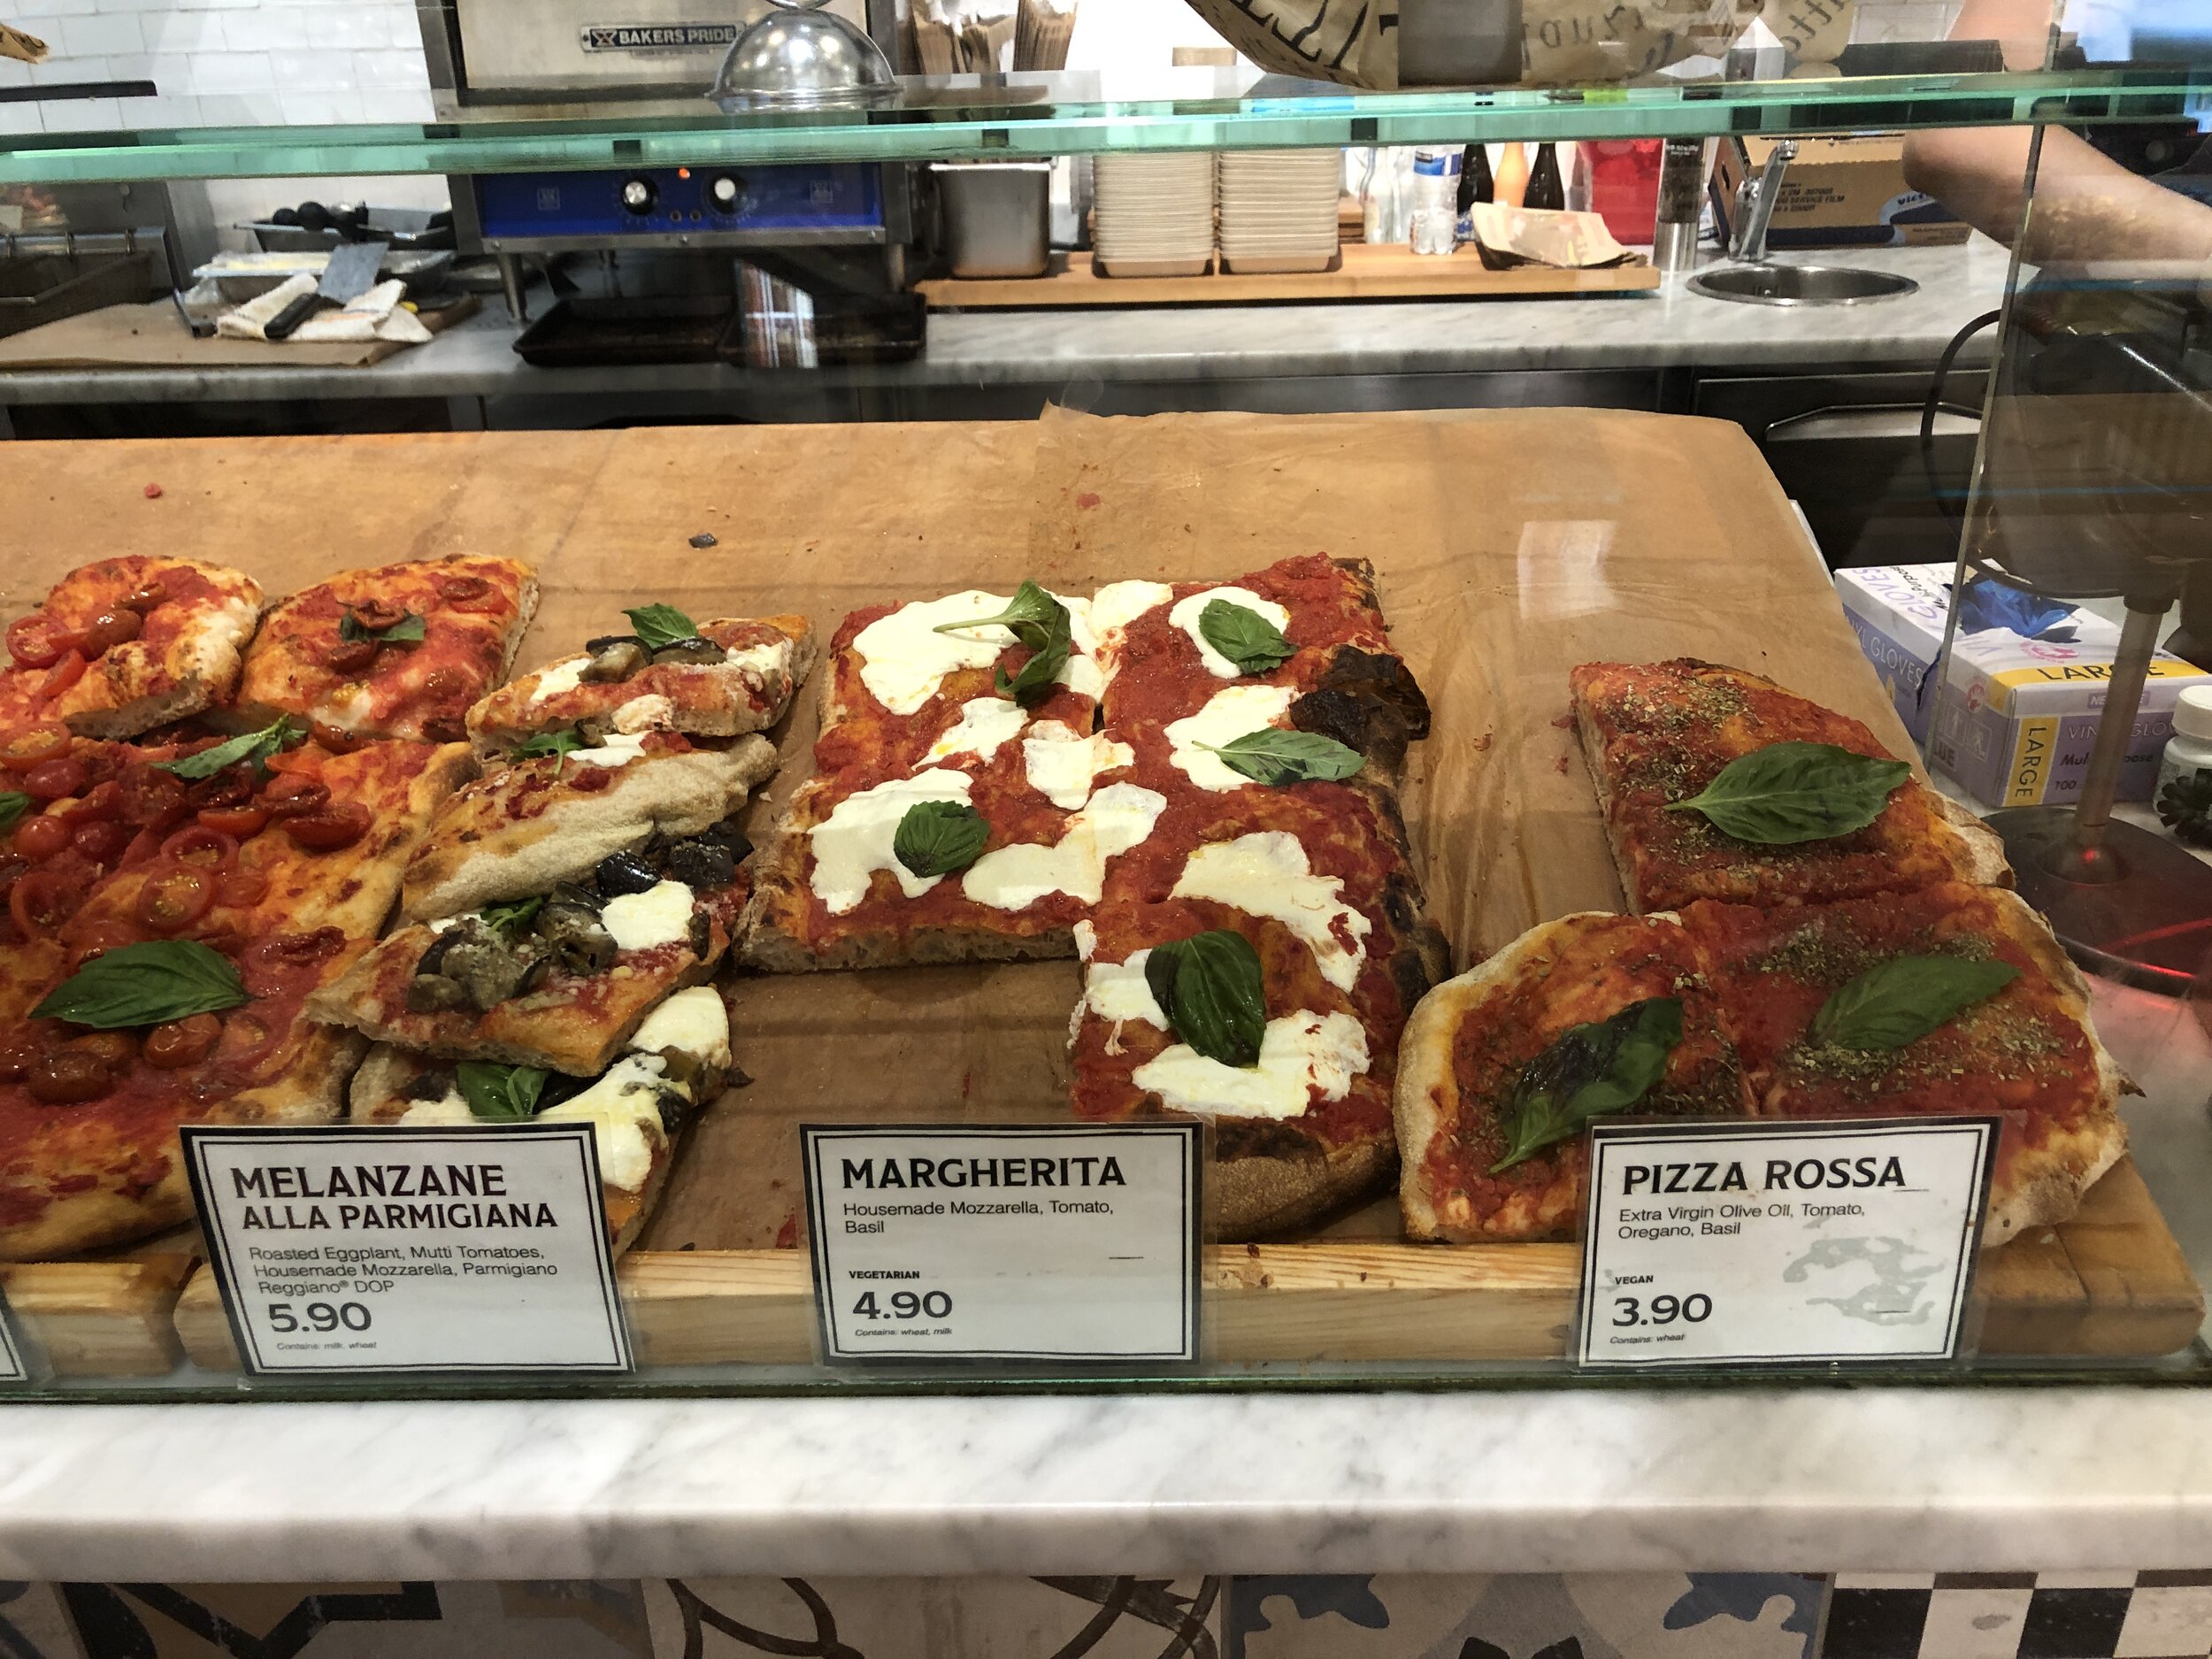 But Eataly's are better and not so pricey!